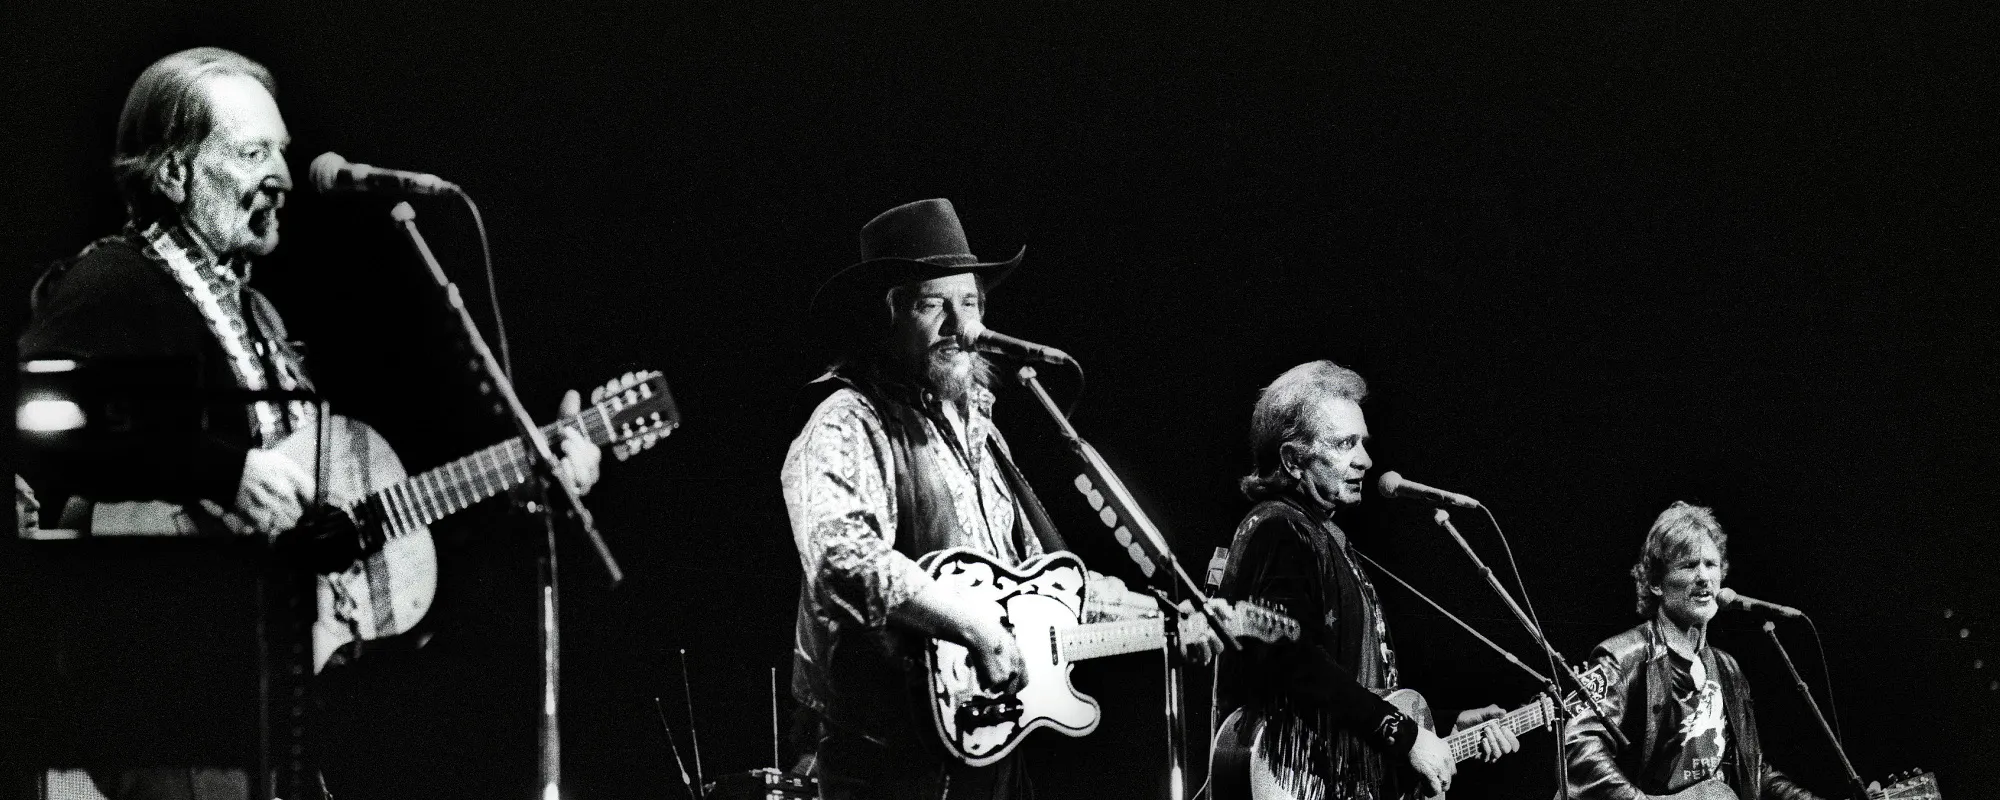 6 Songs That Define Willie Nelson’s Outlaw Country Spirit